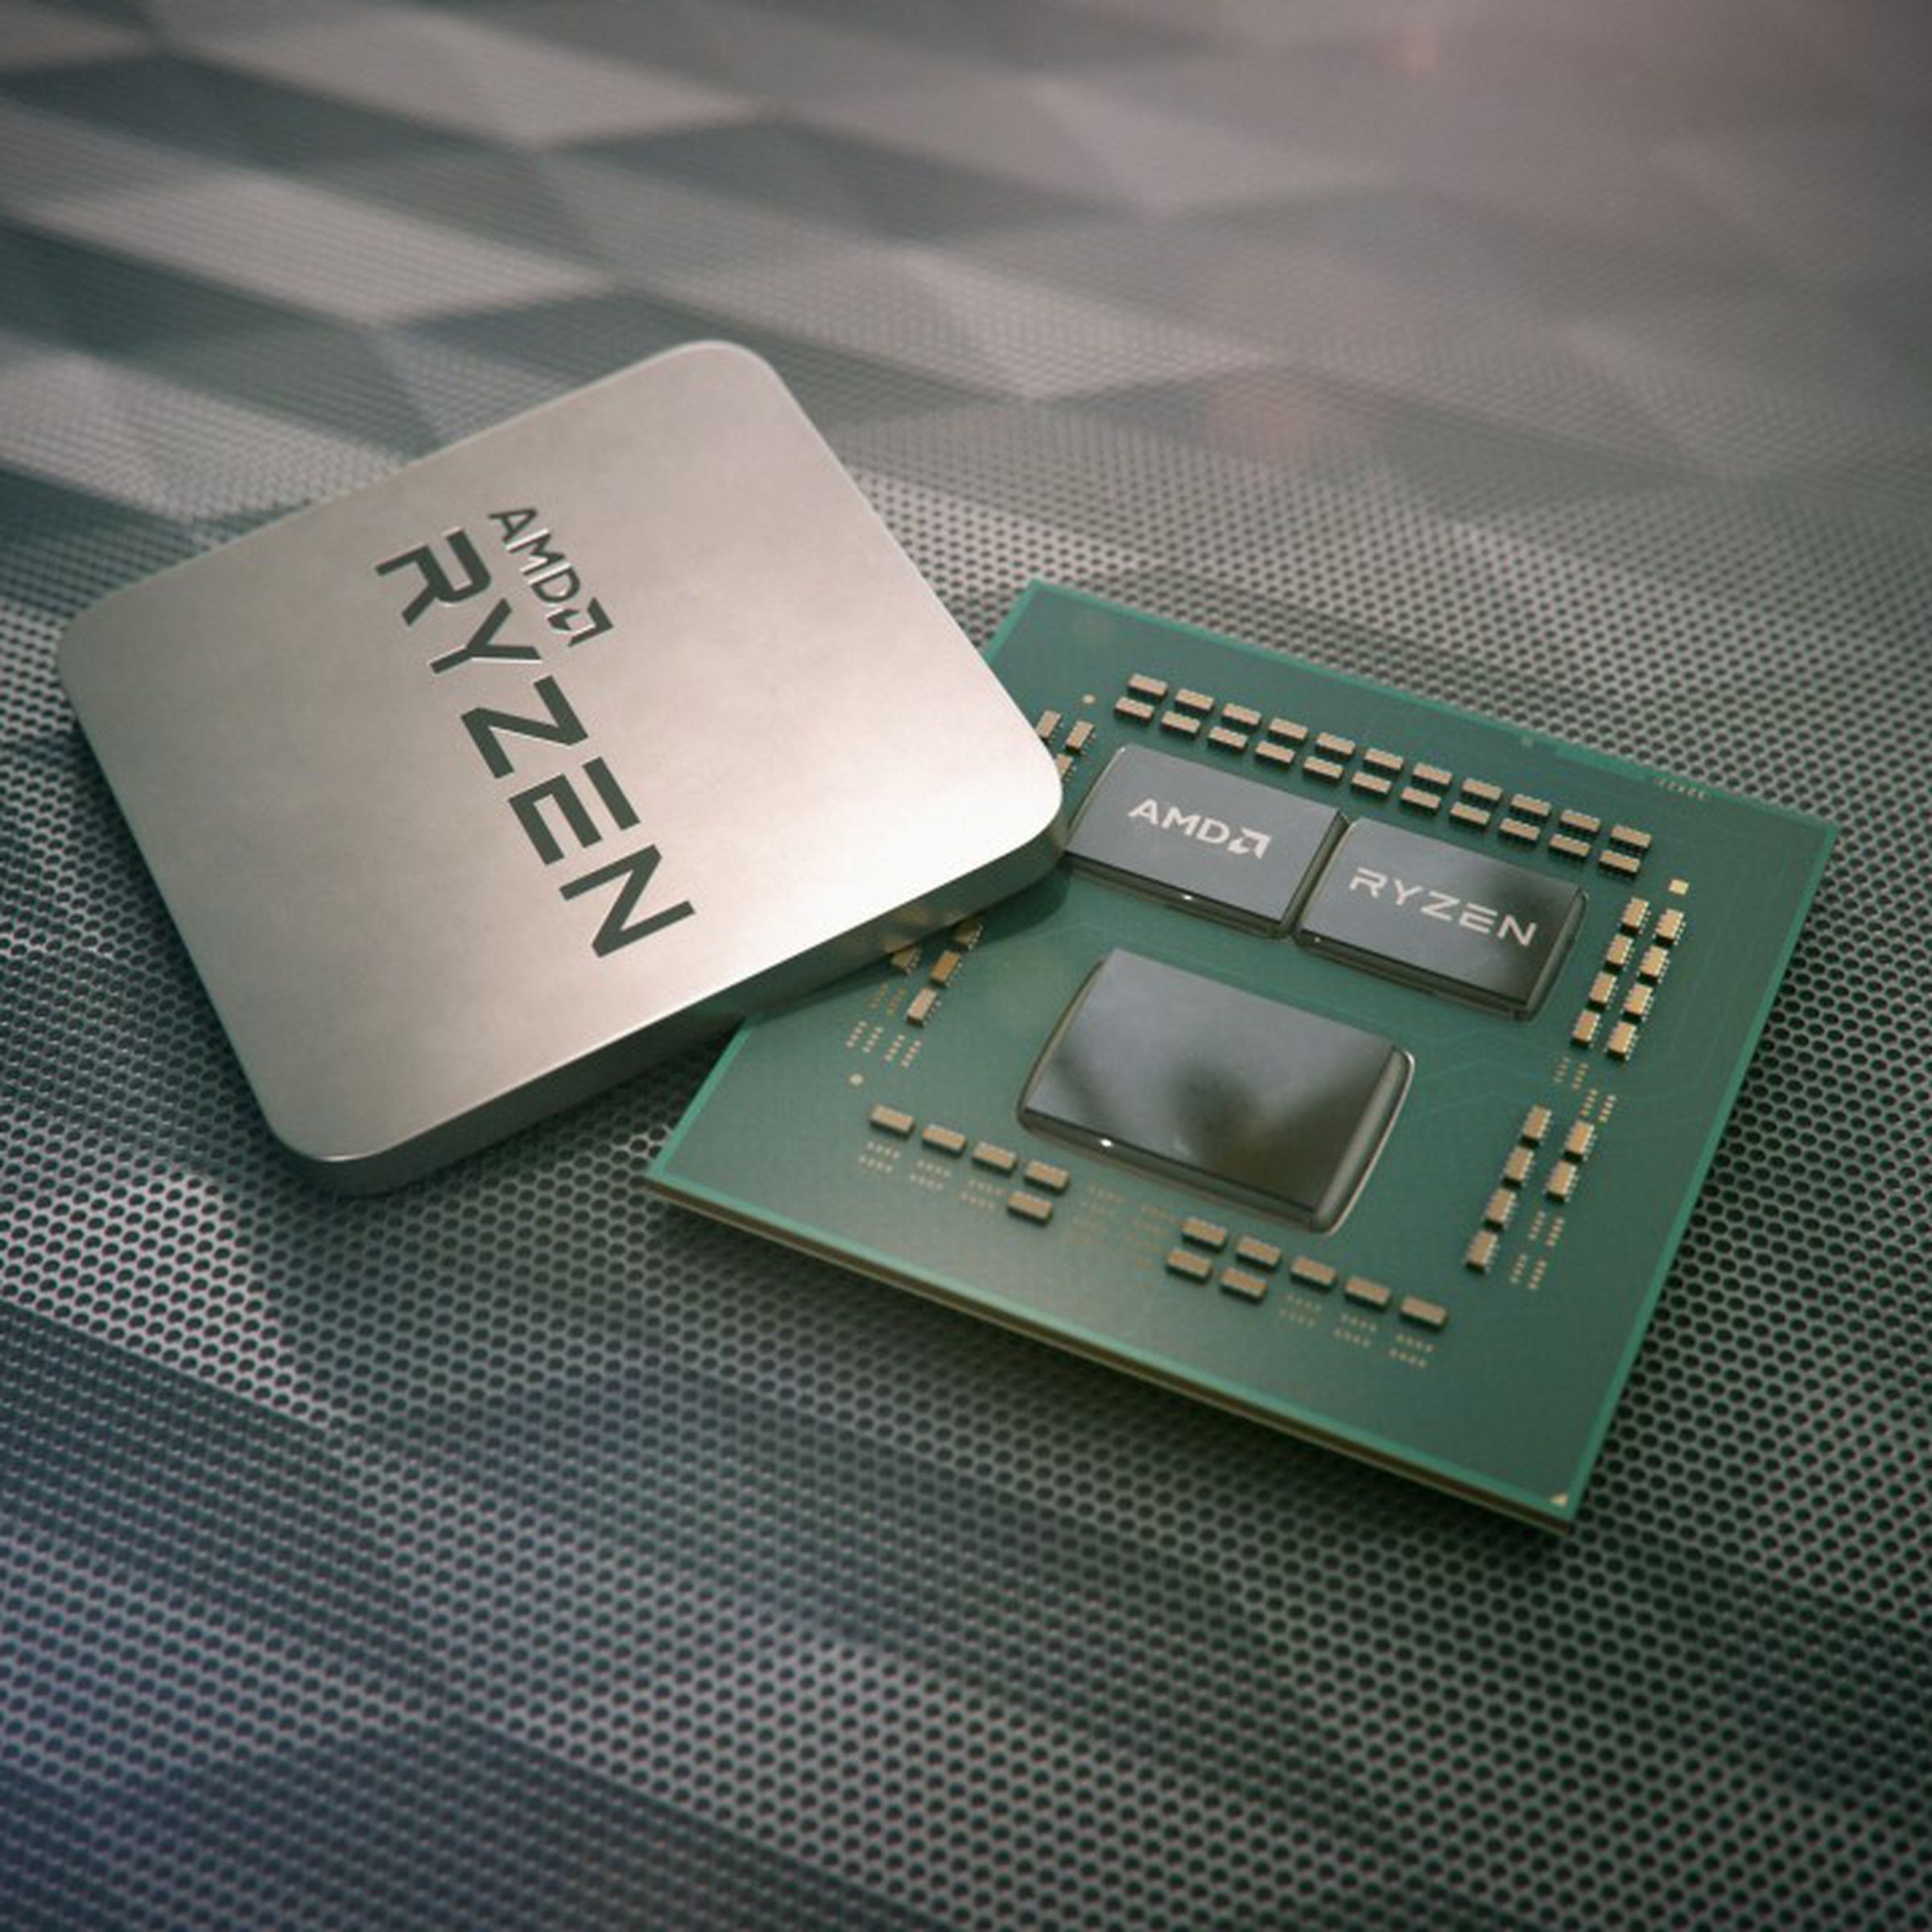 This is the fastest AM4 processor you can upgrade to if you’re not ready to buy into AM5.